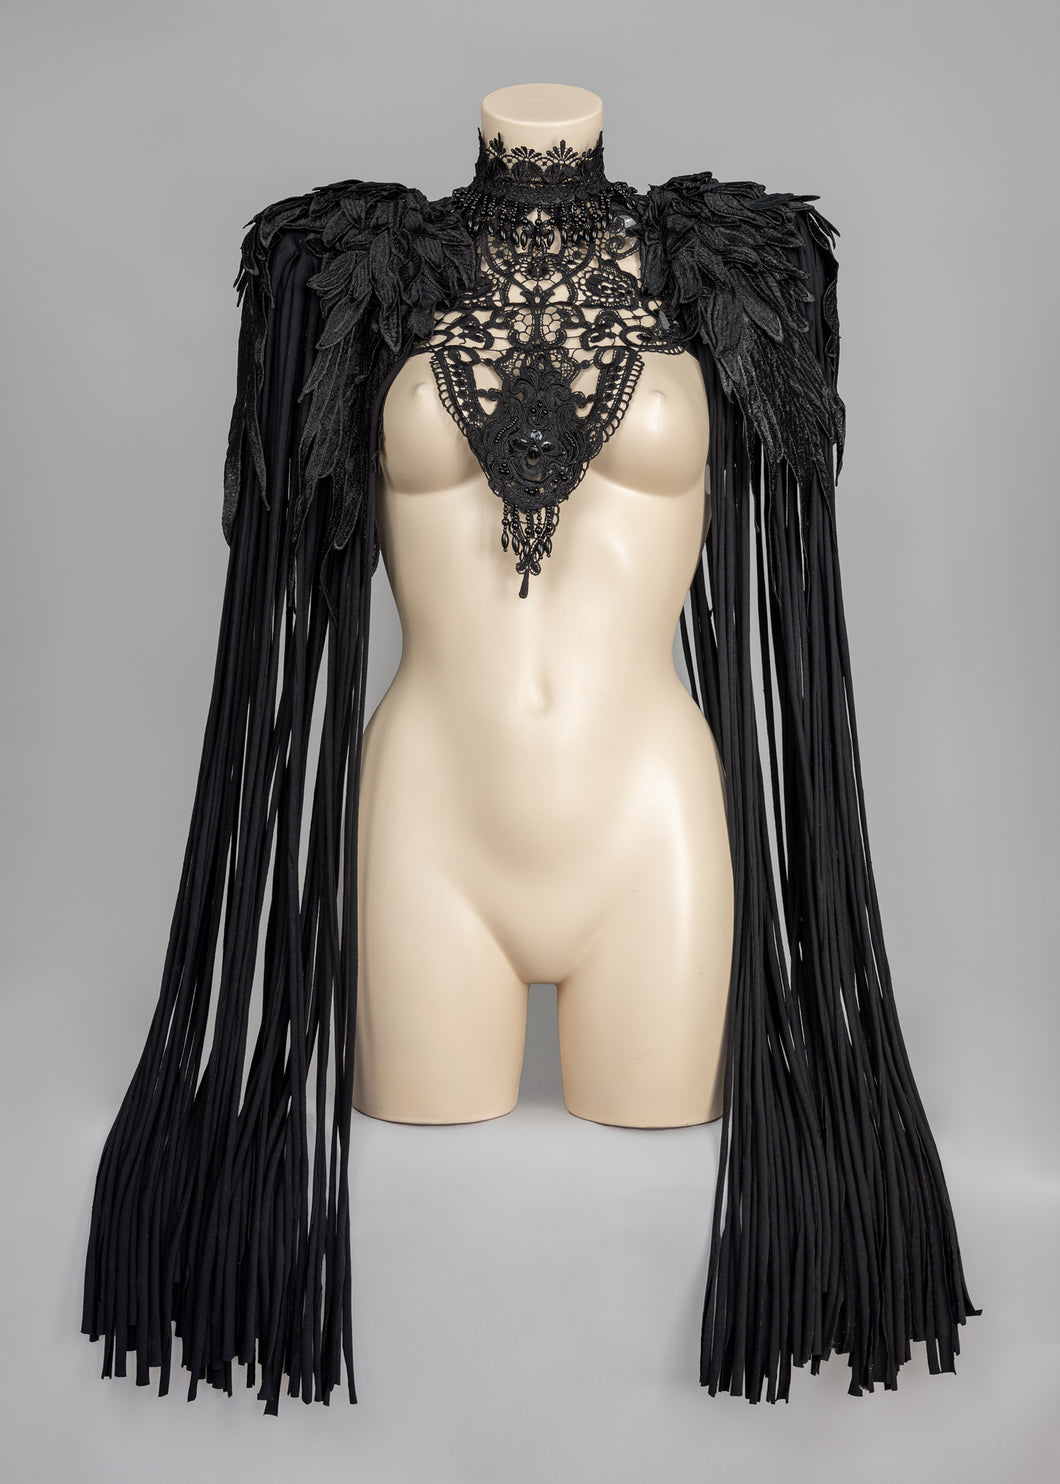 BLACK MASS - 3 Piece Gothic Couture Lace Fringed Shoulder Harness